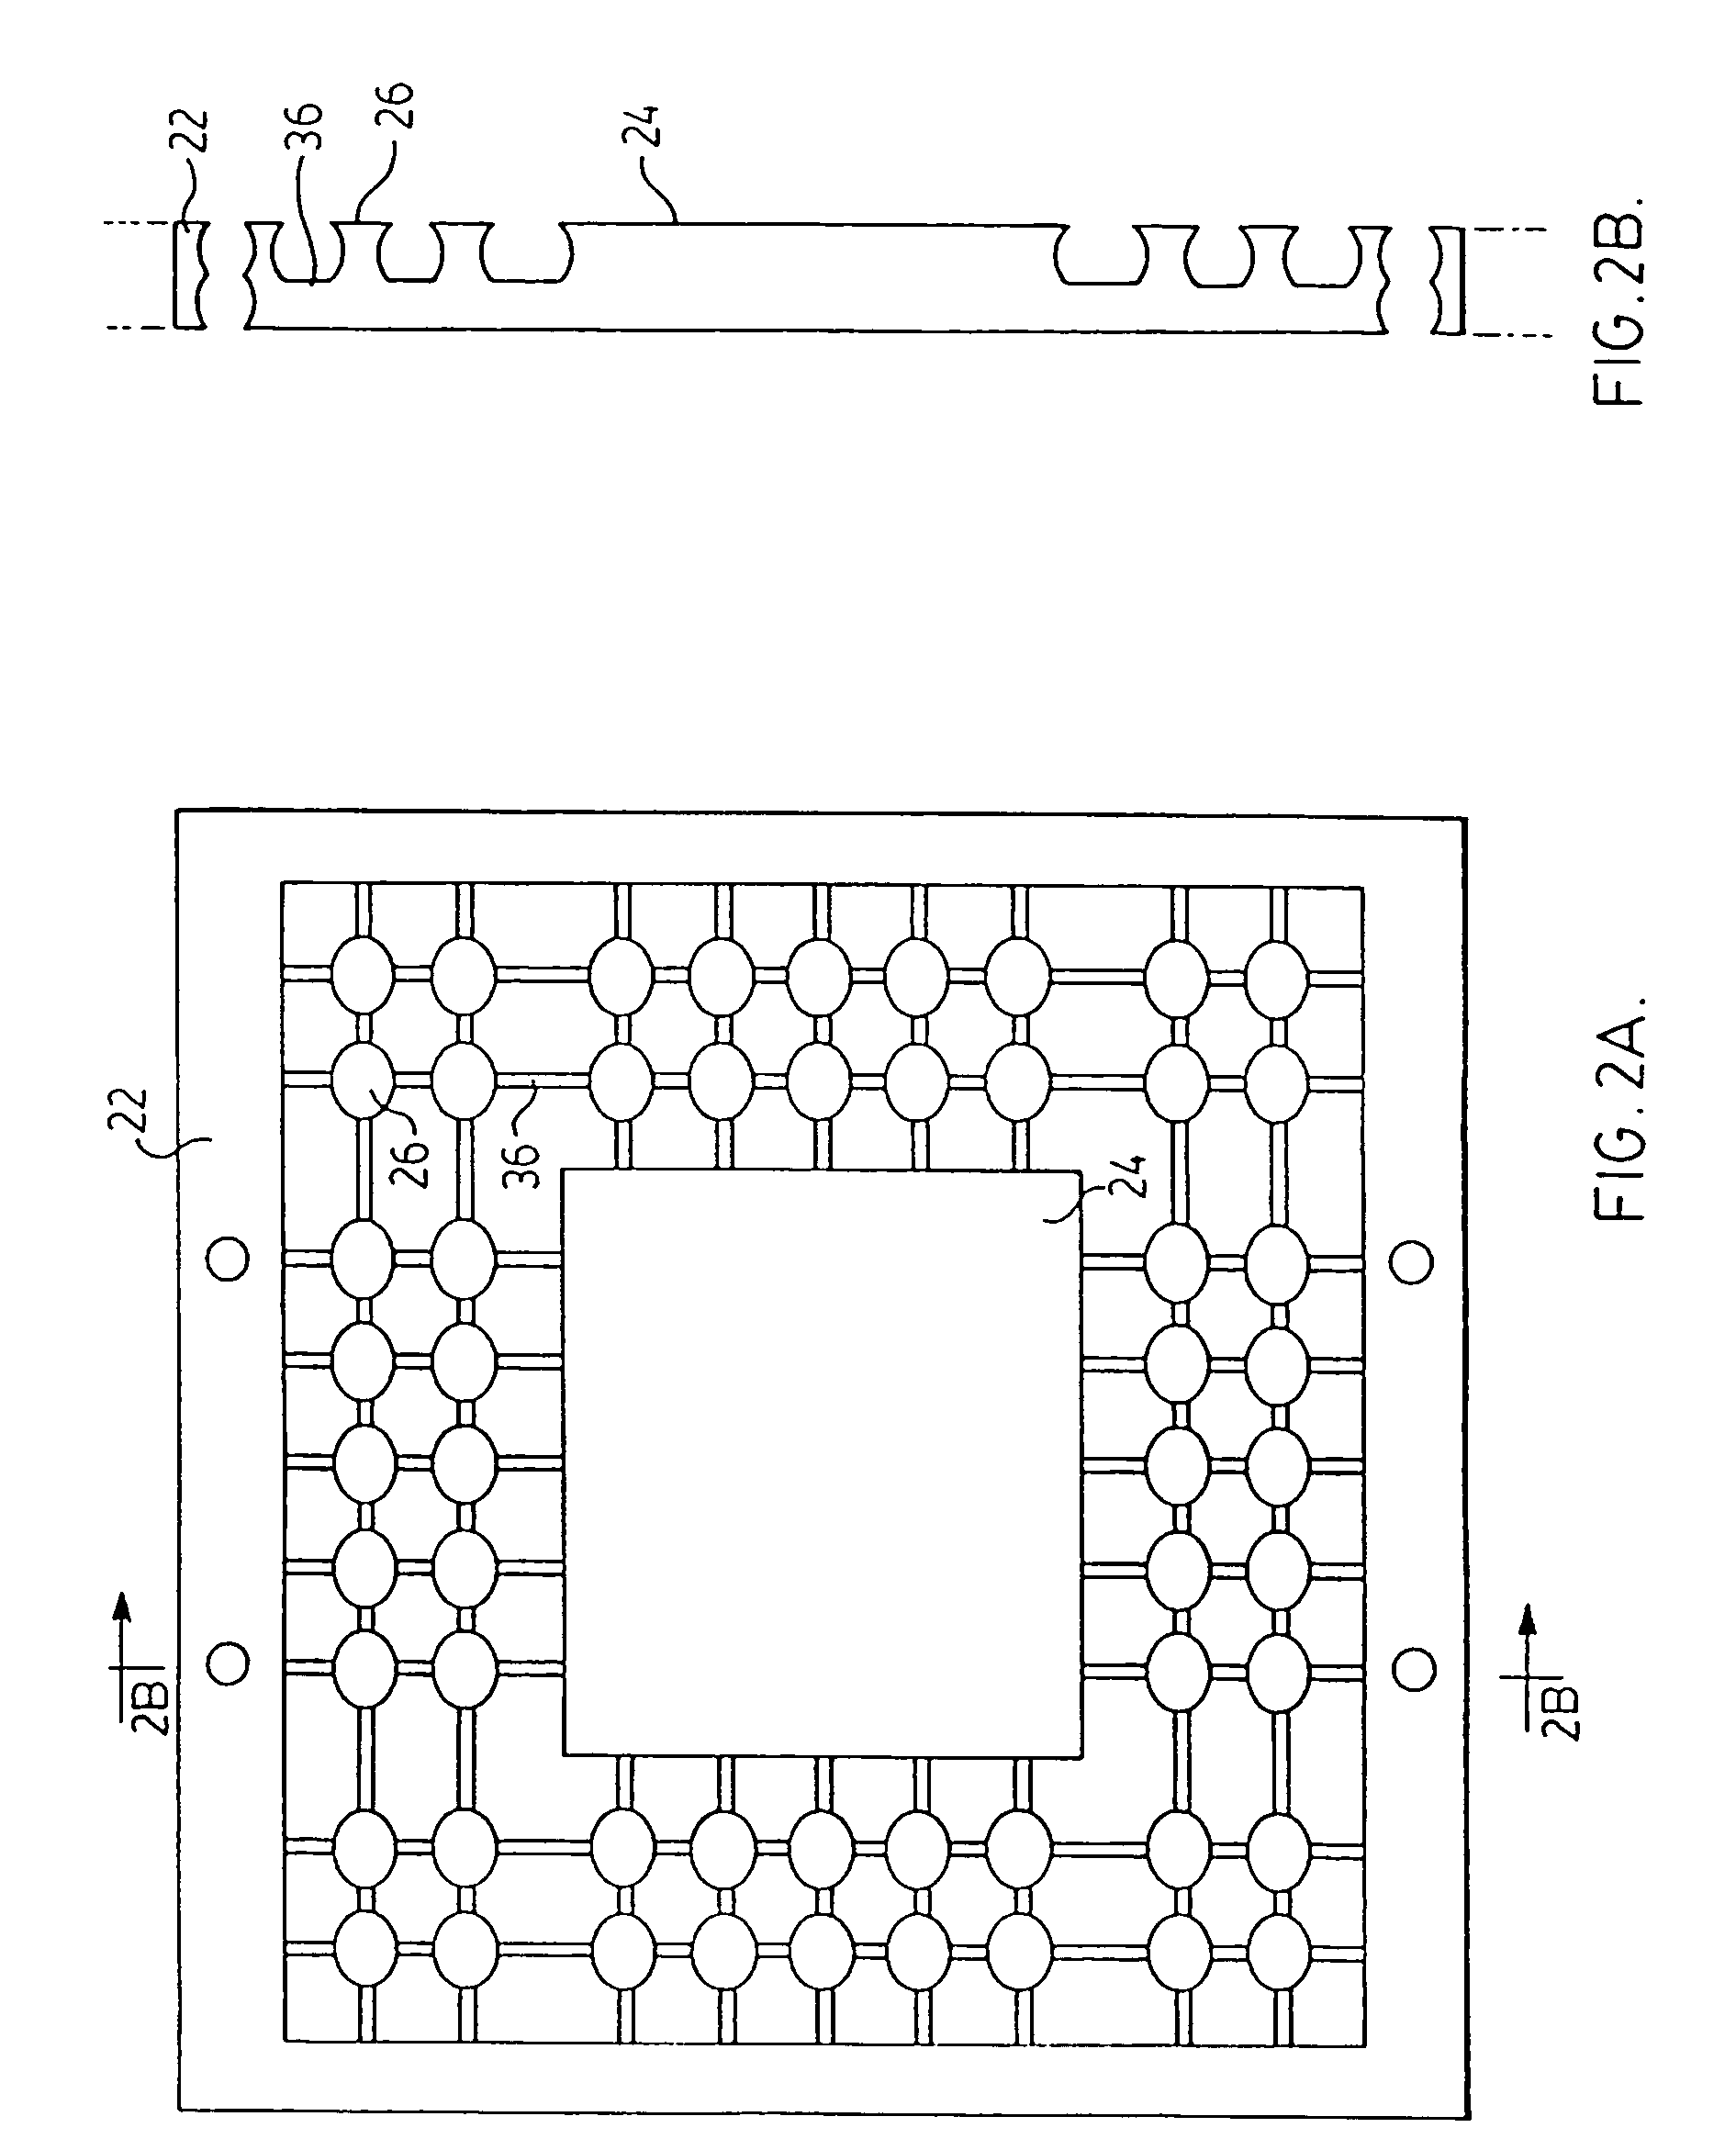 Process for fabricating an integrated circuit package